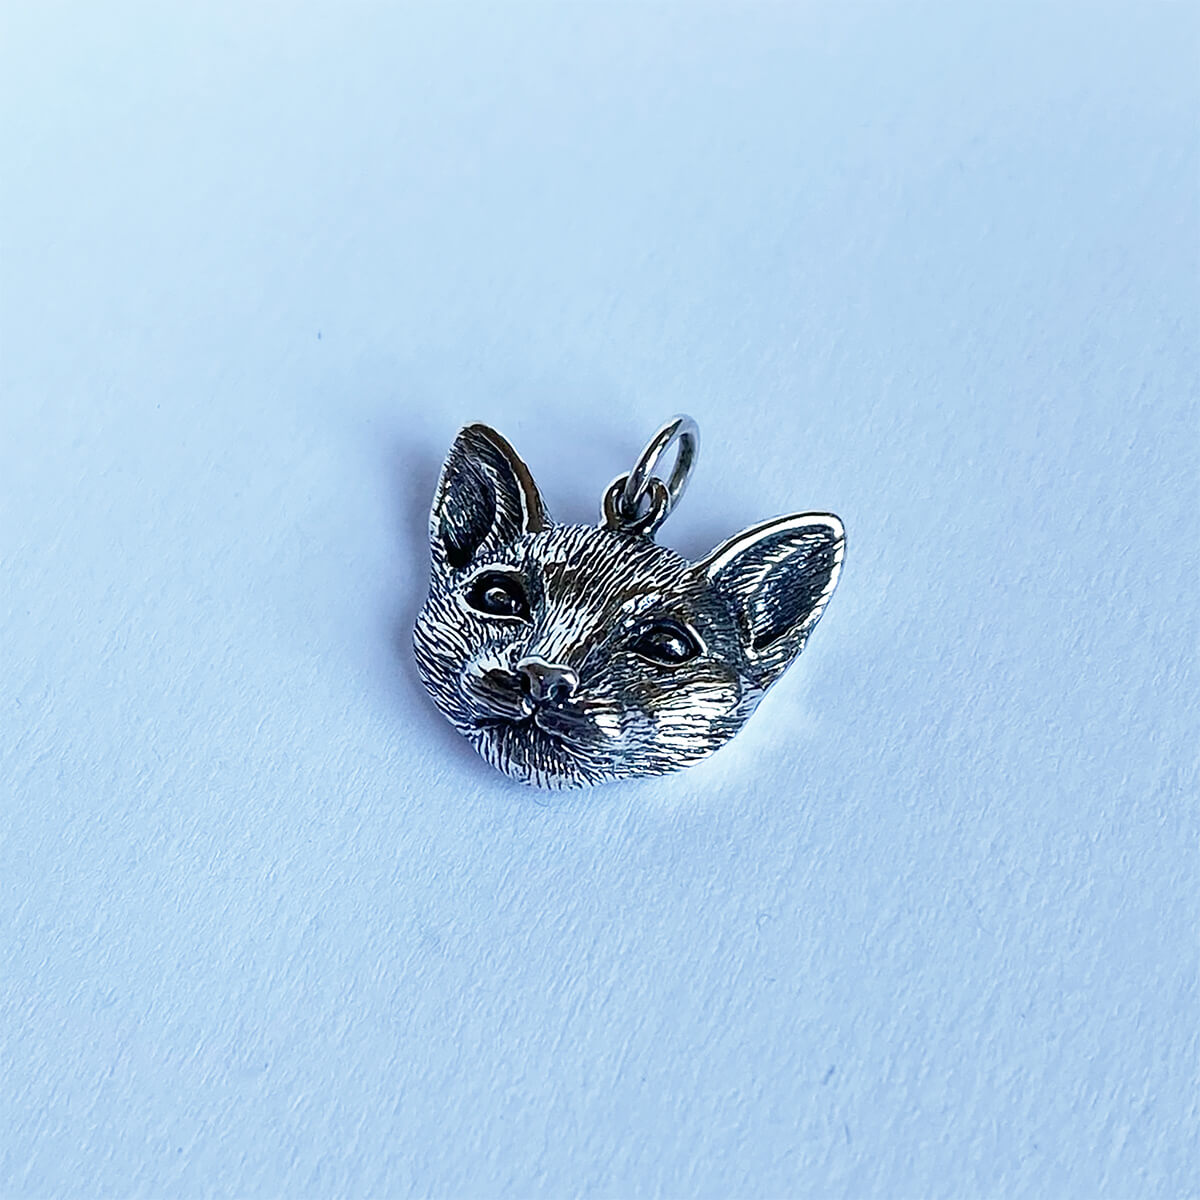 Lifelike sterling silver cat's head pendant from Charmarama Charms